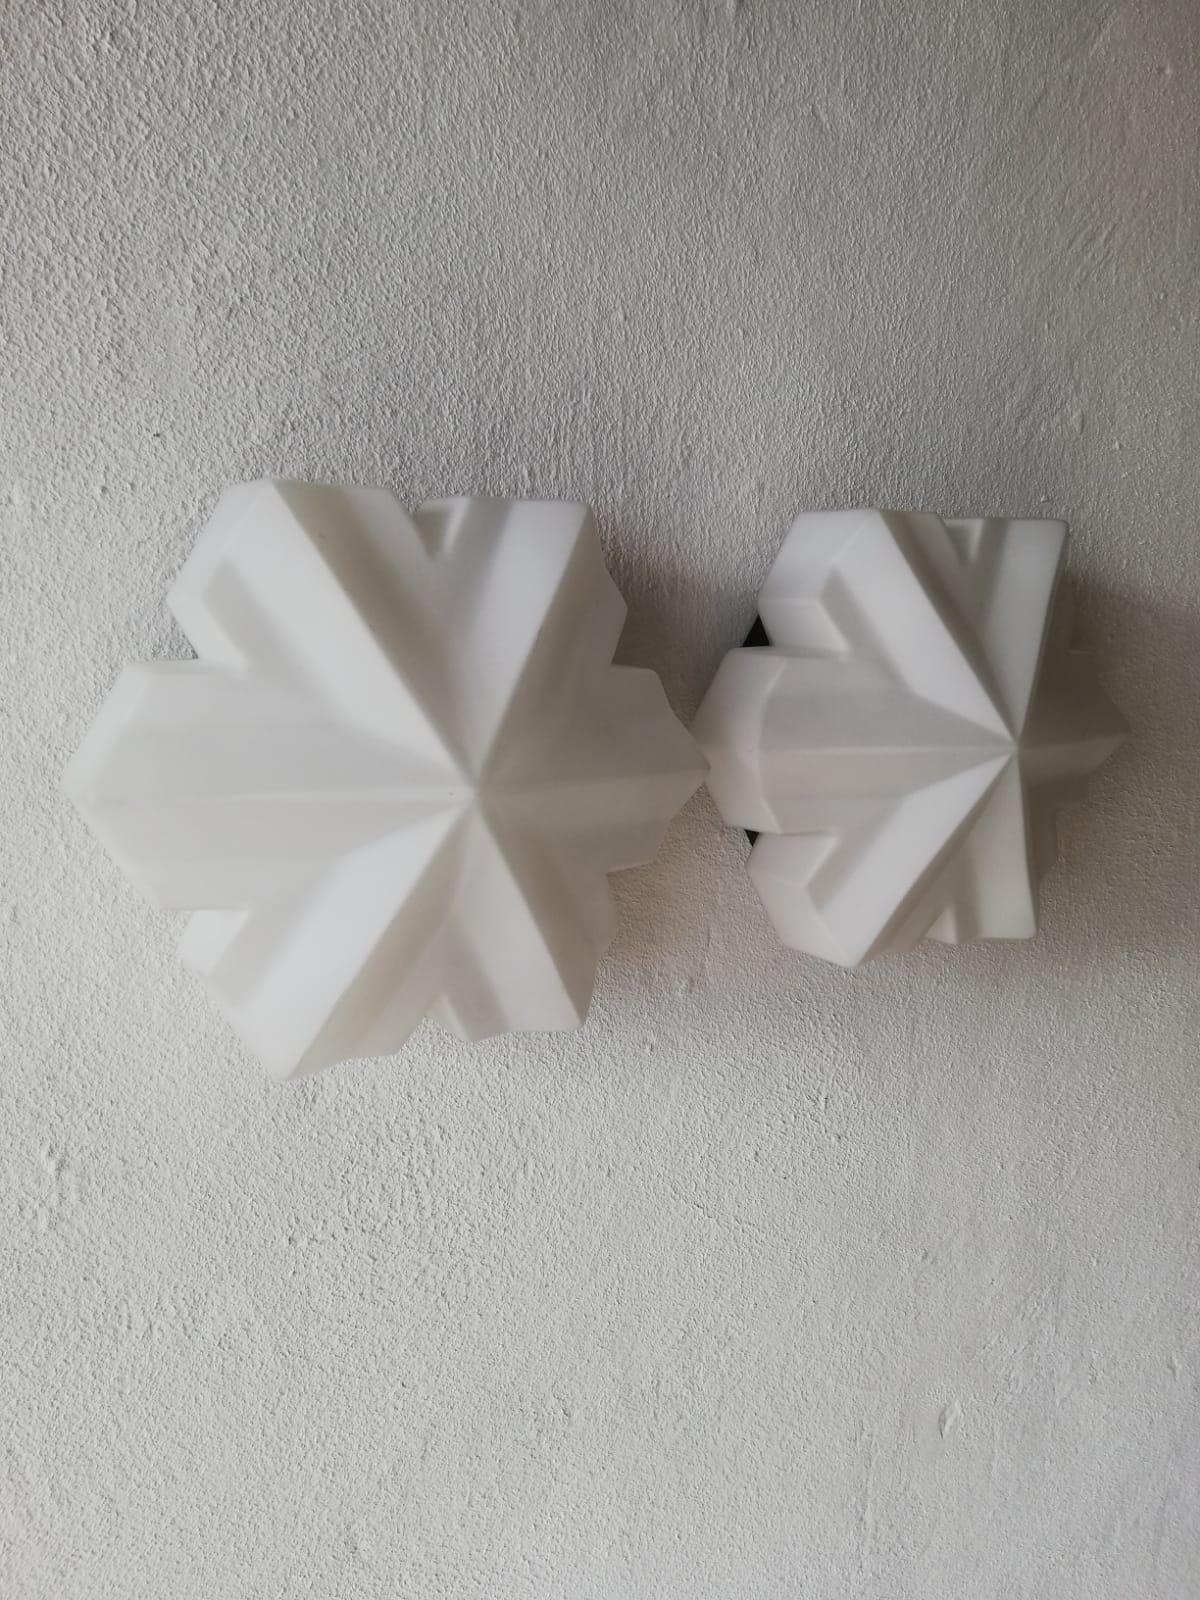 3 dimensional hexagonal opal glass pair of wall lamps by BEGA, 1960s Germany

Rare and Minimalist clover leaf shape wall sconces.

Lamps are in very good vintage condition.

These lamps works with E14 standard light bulbs. 
Wired and suitable